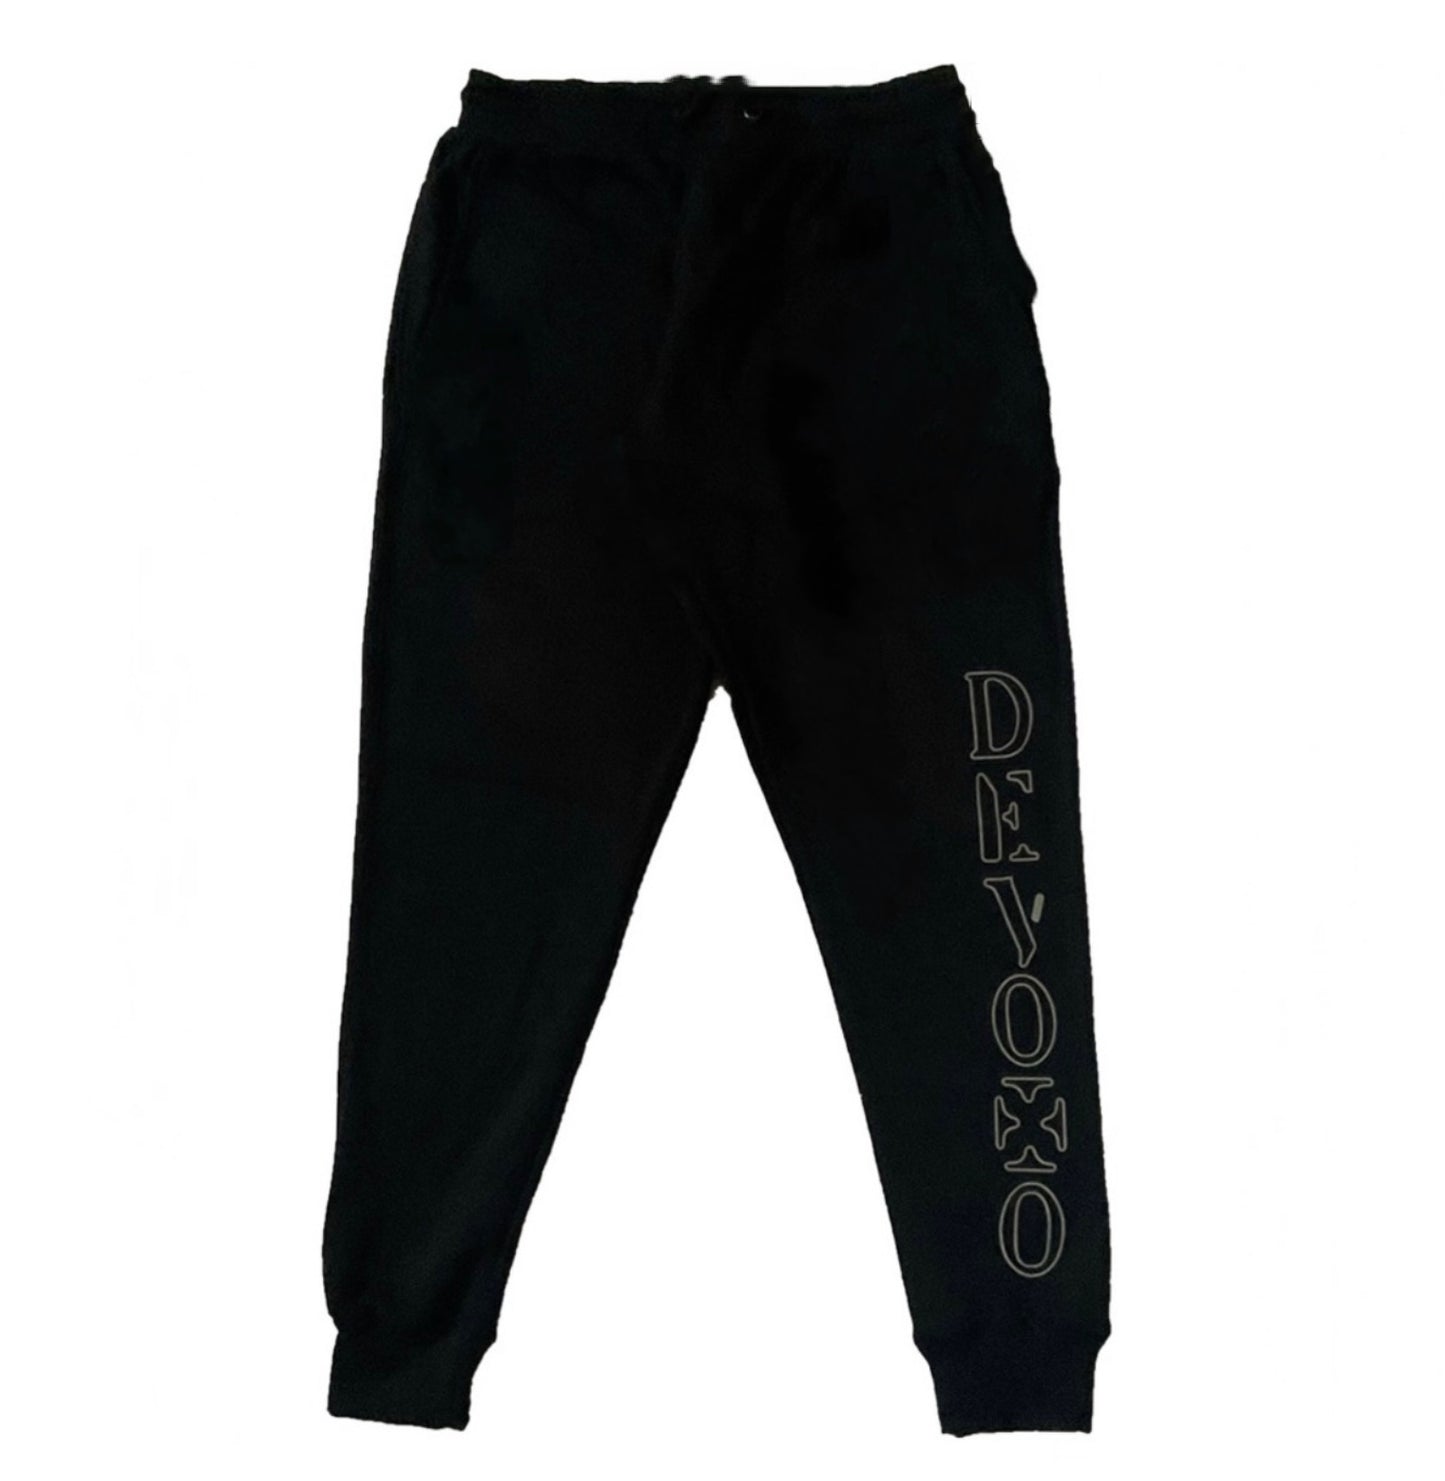 Reflective Graphic Tracksuit - Mens Full Set